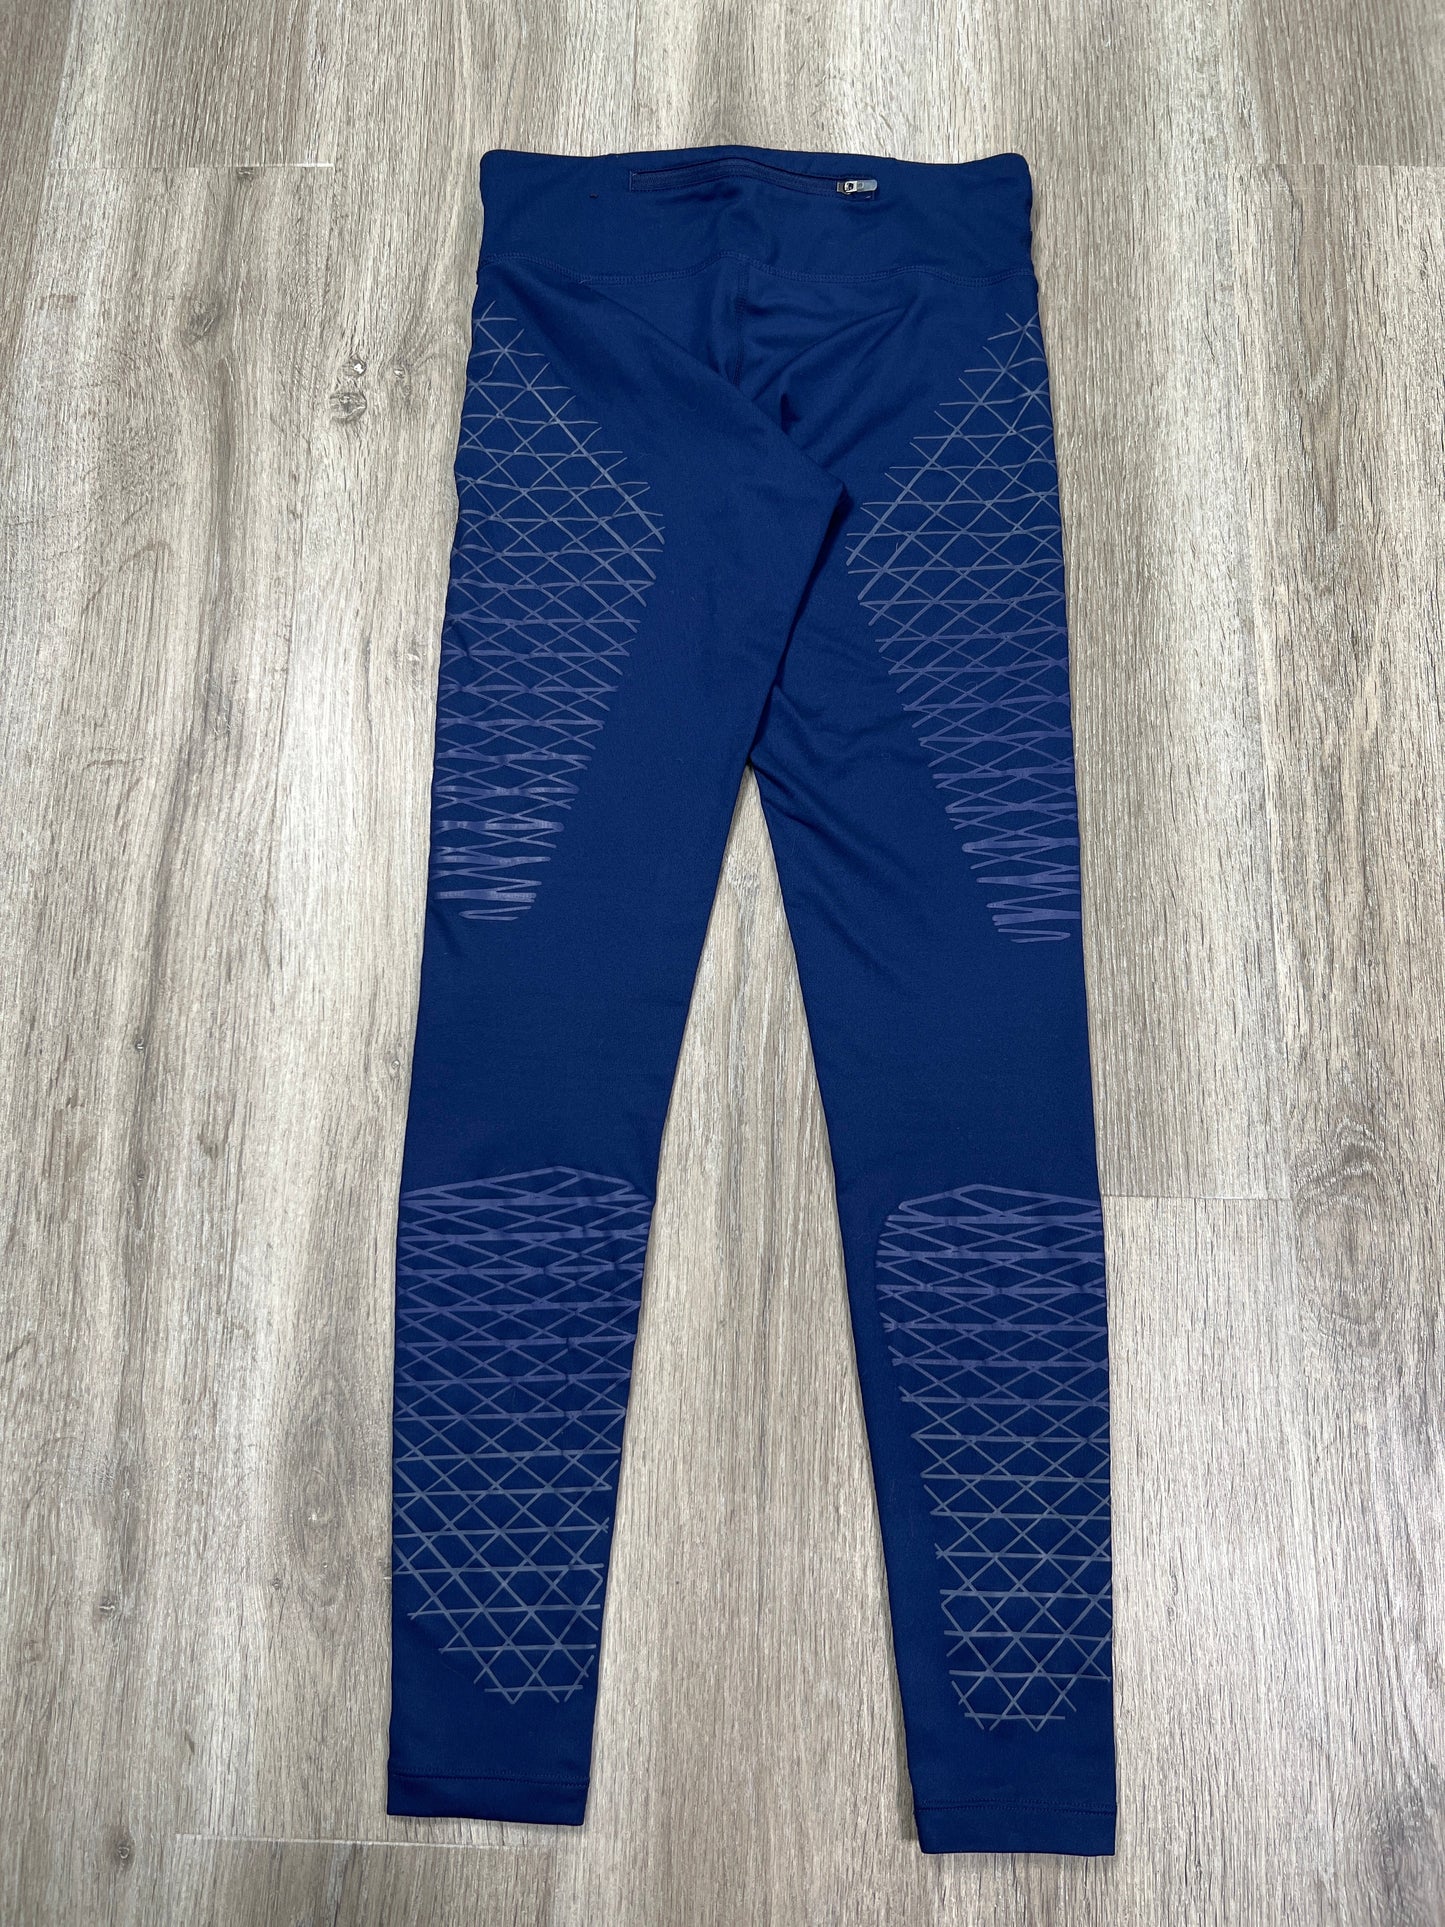 Athletic Leggings By Nike Apparel  Size: Xs